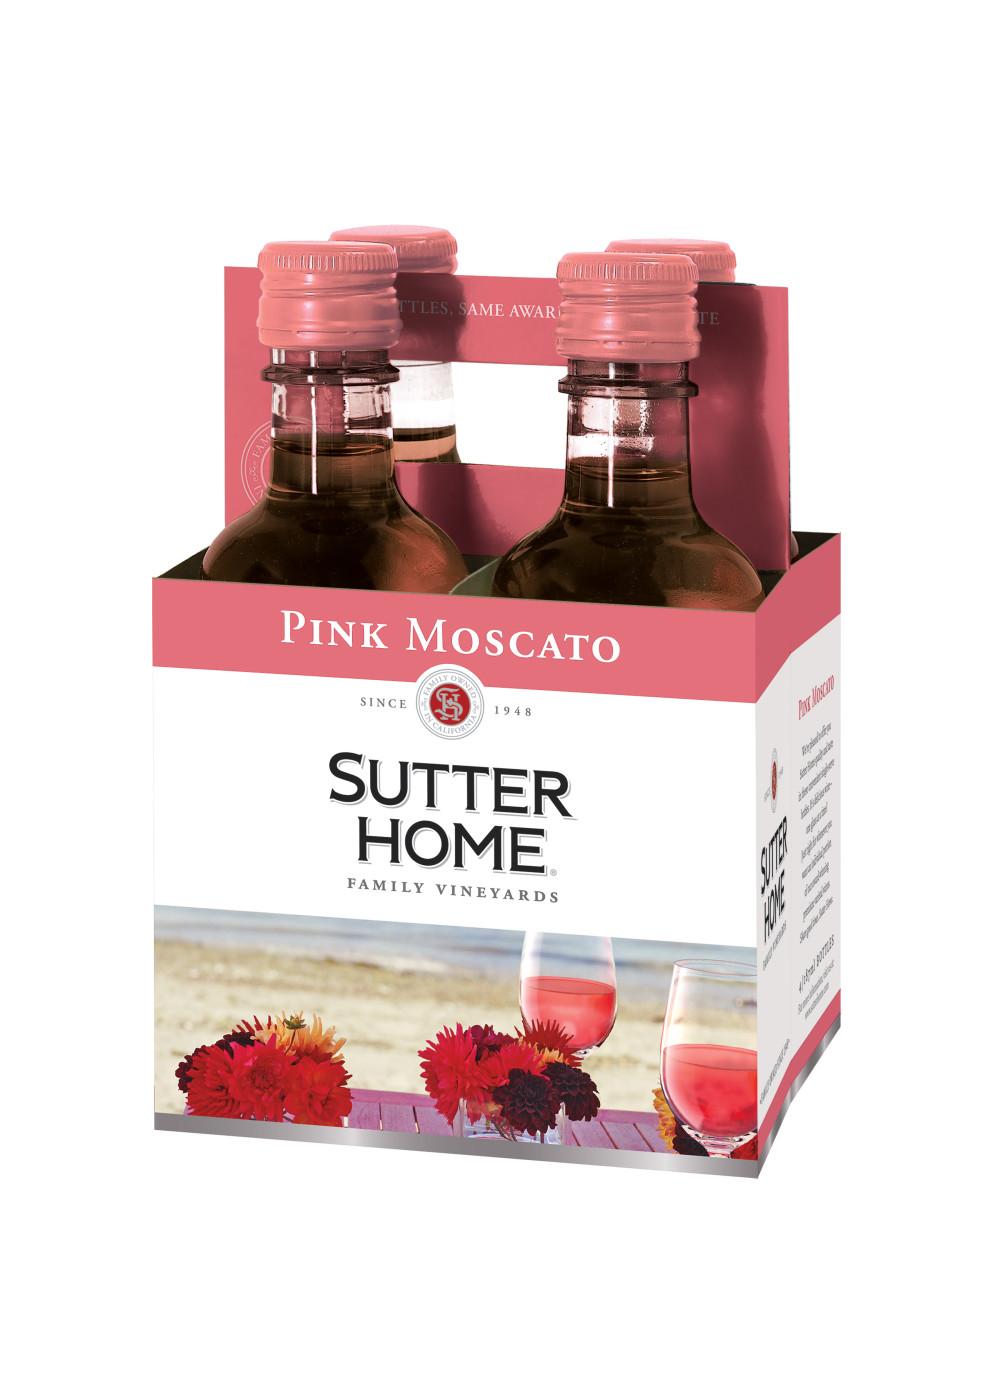 Sutter Home Family Vineyards Pink Moscato 187 mL Bottles; image 1 of 7